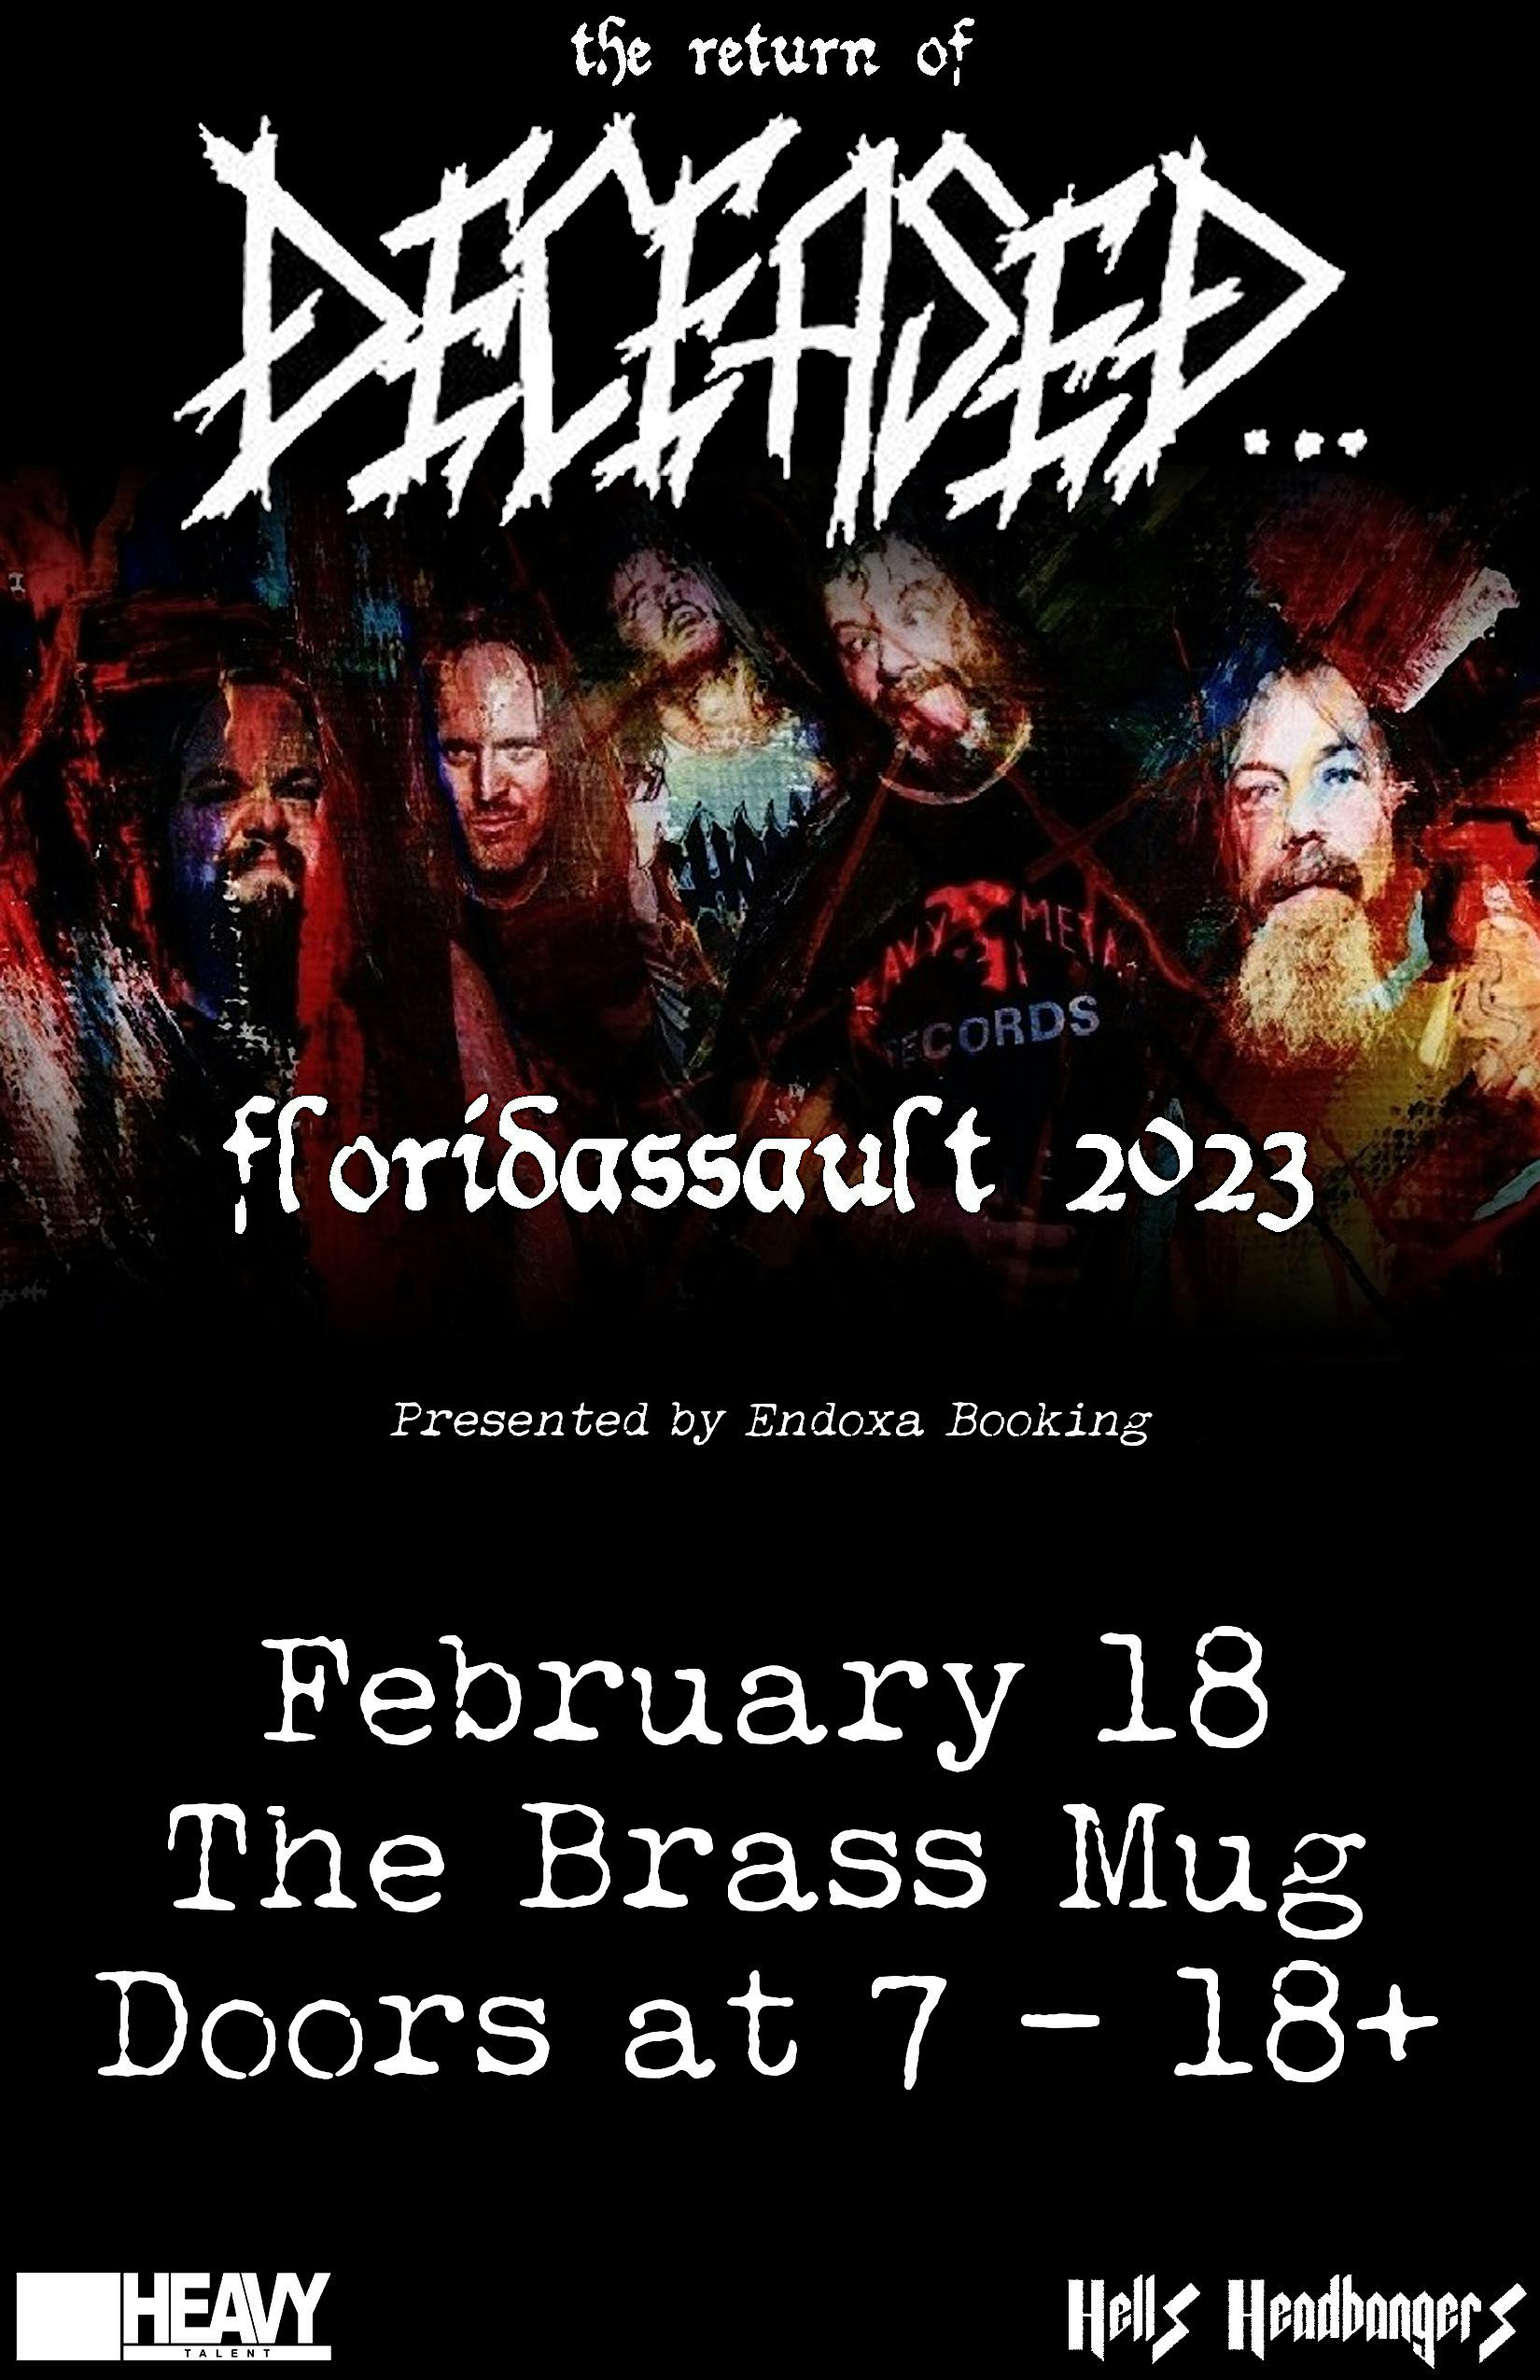 Deceased, Virulence, Corrupted Saint, and More in Tampa at The Brass Mug